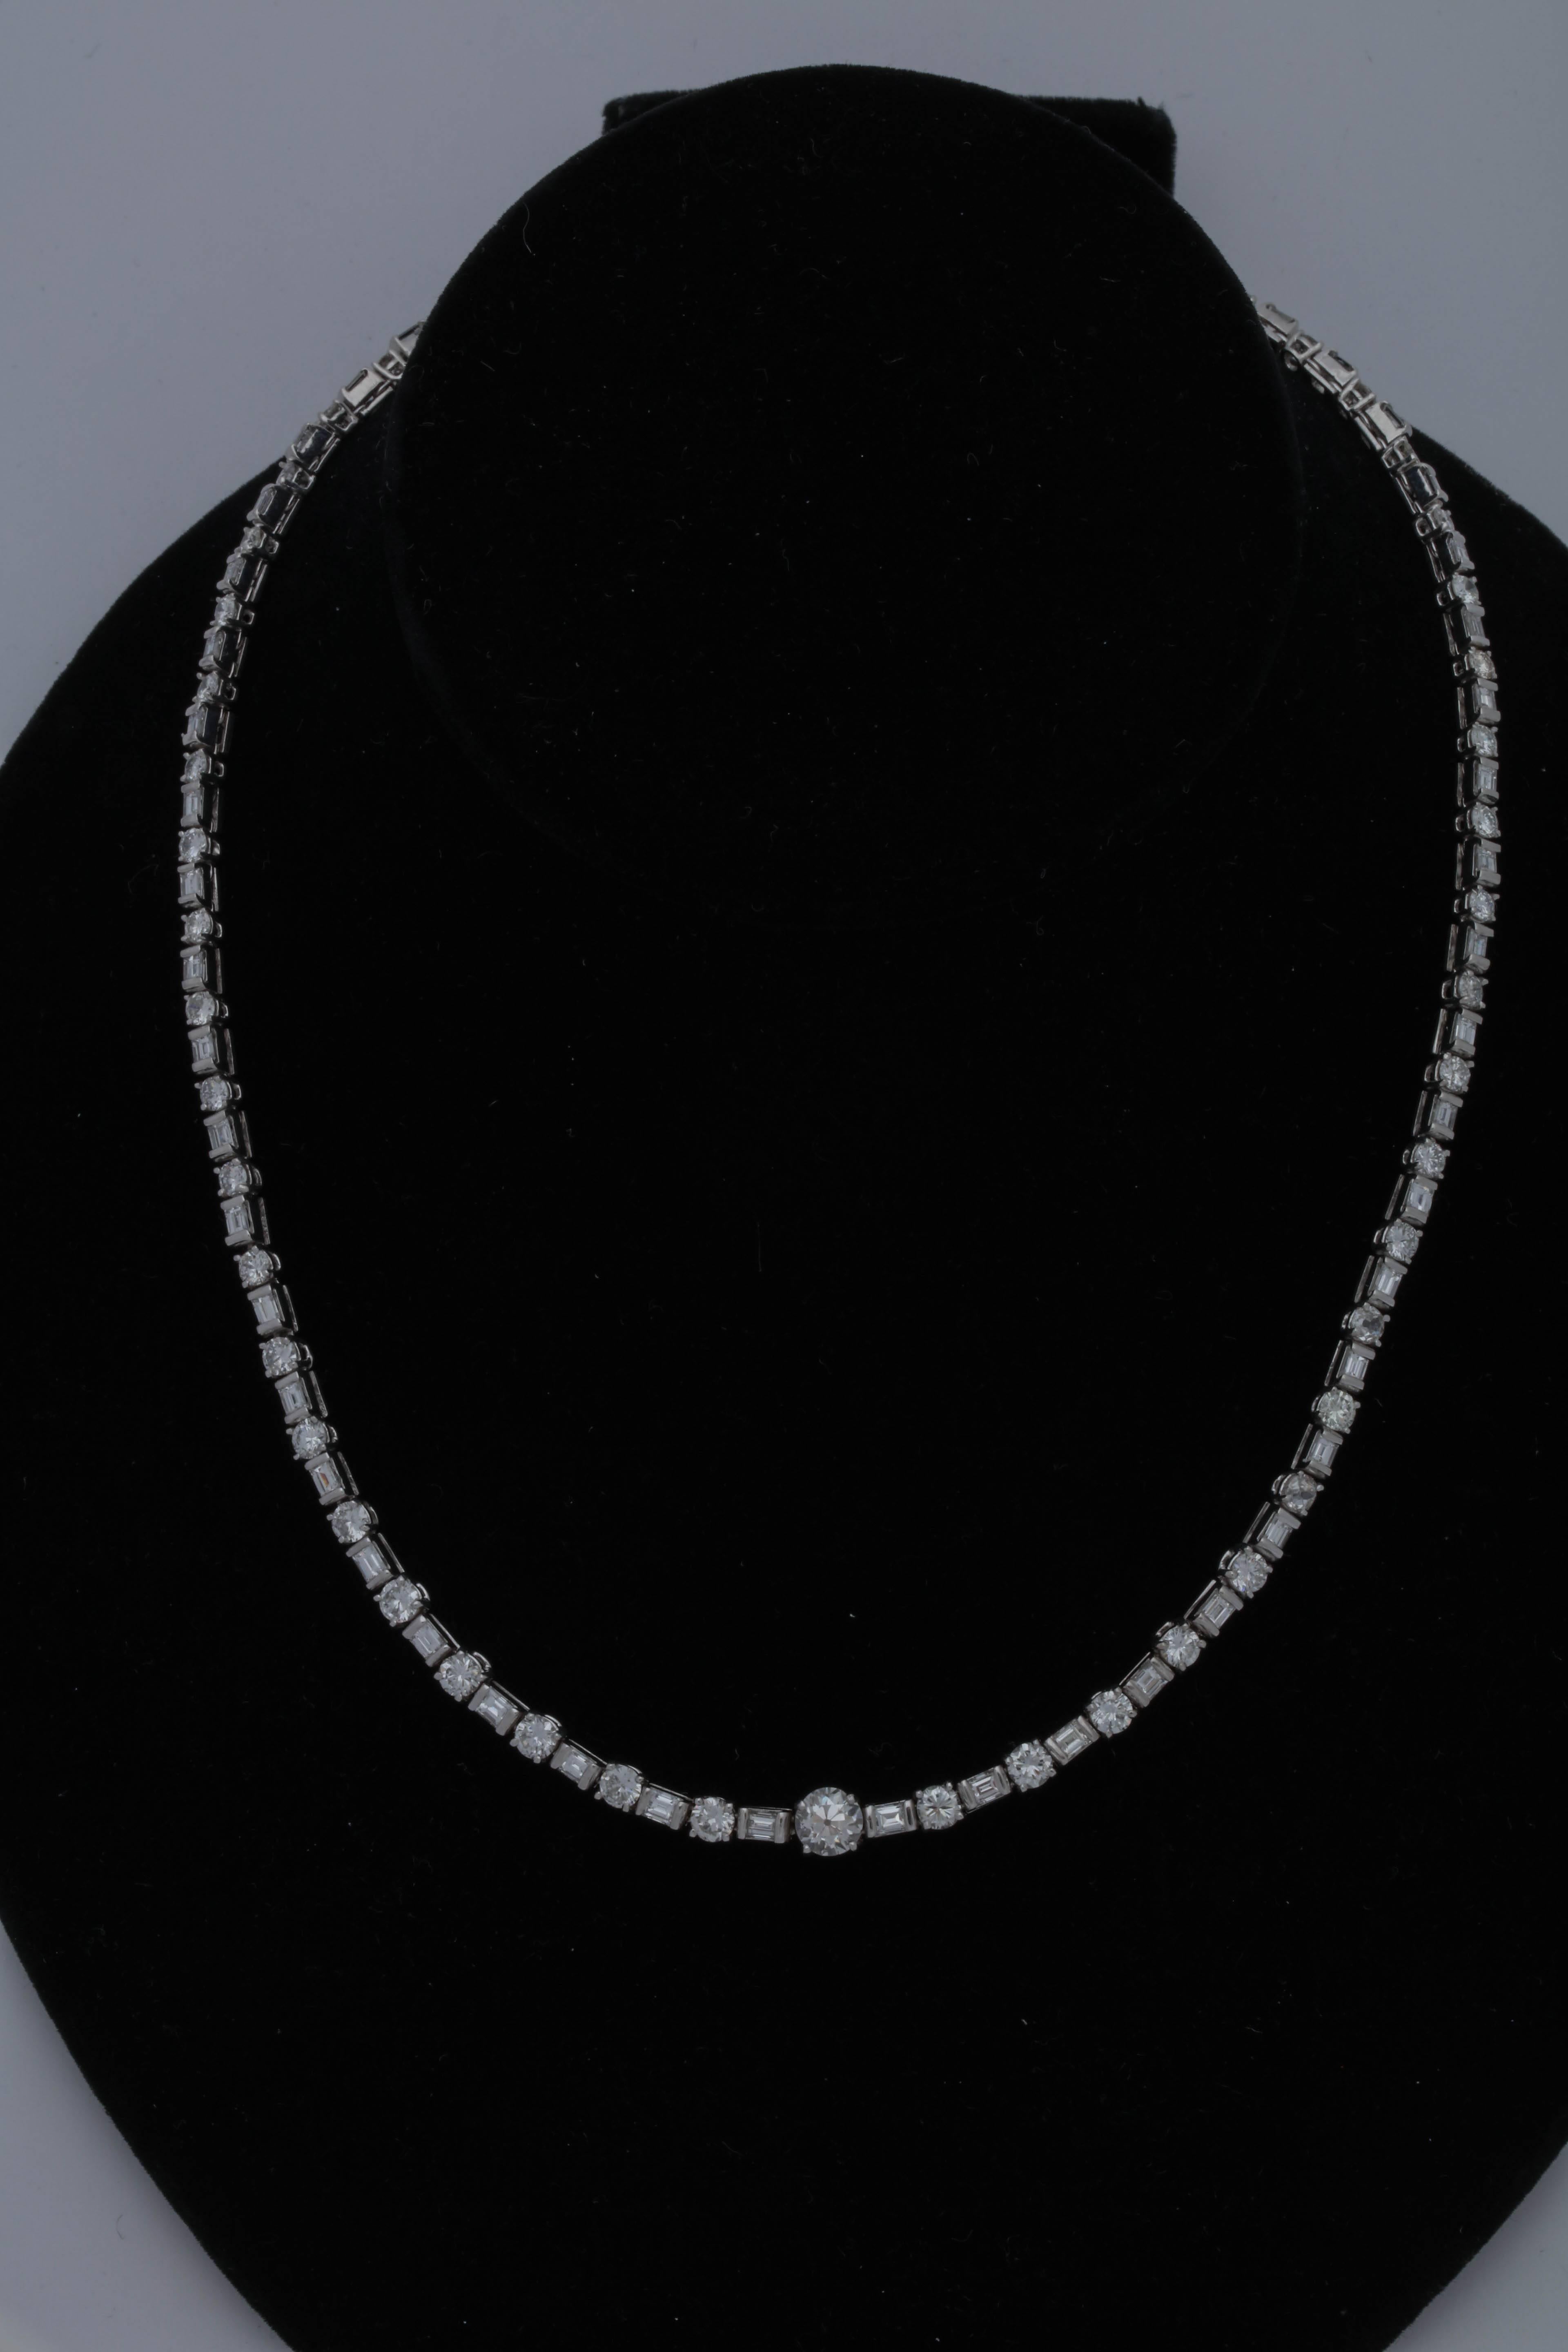 One Ladies Platinum Necklace Designed In a Riviere Style Flexible Straightline Motif. This Platinum Necklace Is embellished With Numerous Alternating High Quality Horizontal Baguettes And With Alternating Prong Set Full Cut round diamonds . Total